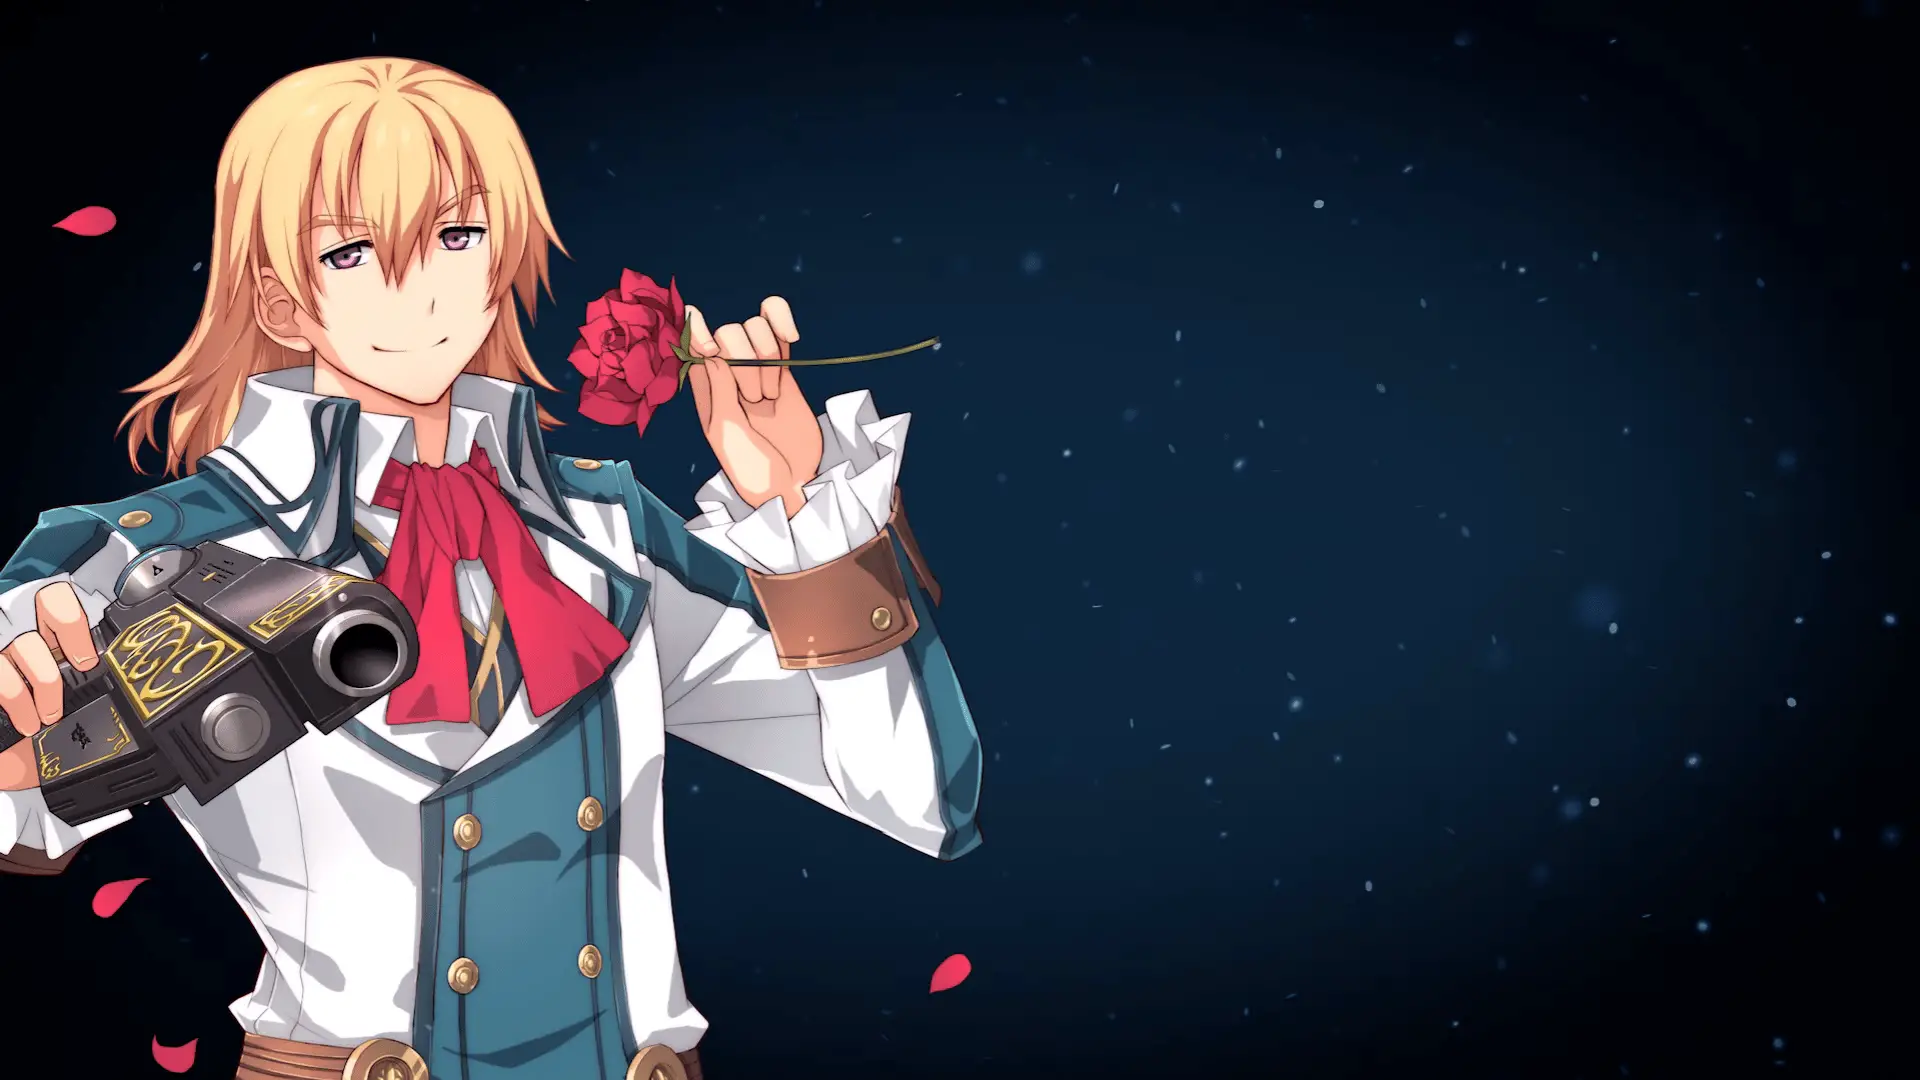 Official Trails Character Video Series Introduces the Veiled Bard, Olivier Lenheim